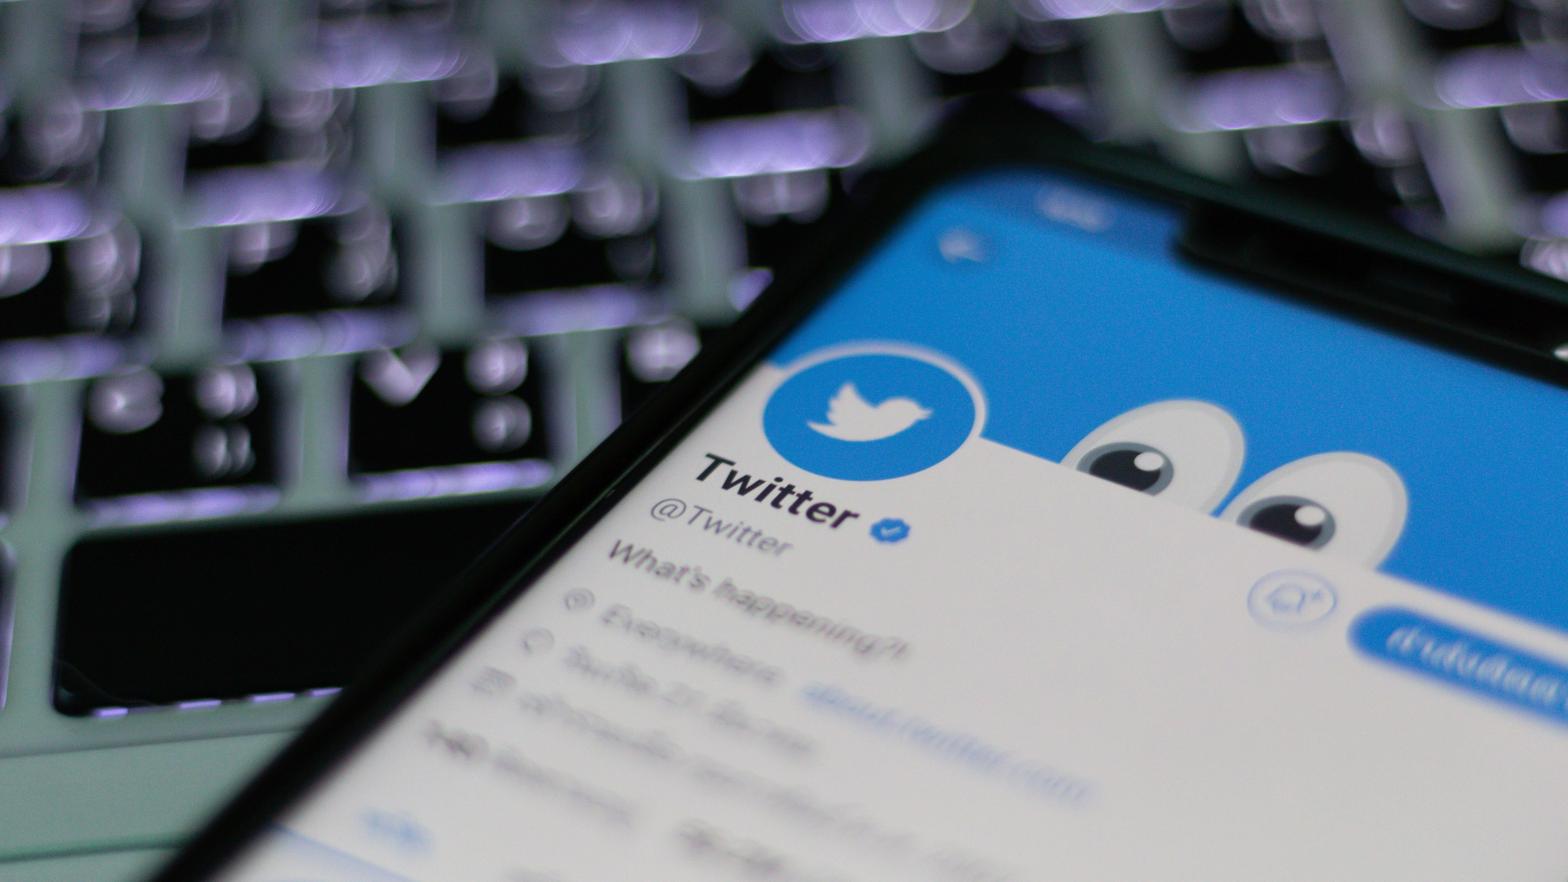 Several tech companies submitted reports for the EU's Transparency Centre, but the union says that Twitter's was lacking data.  (Image: Sattalat Phukkum, Shutterstock)